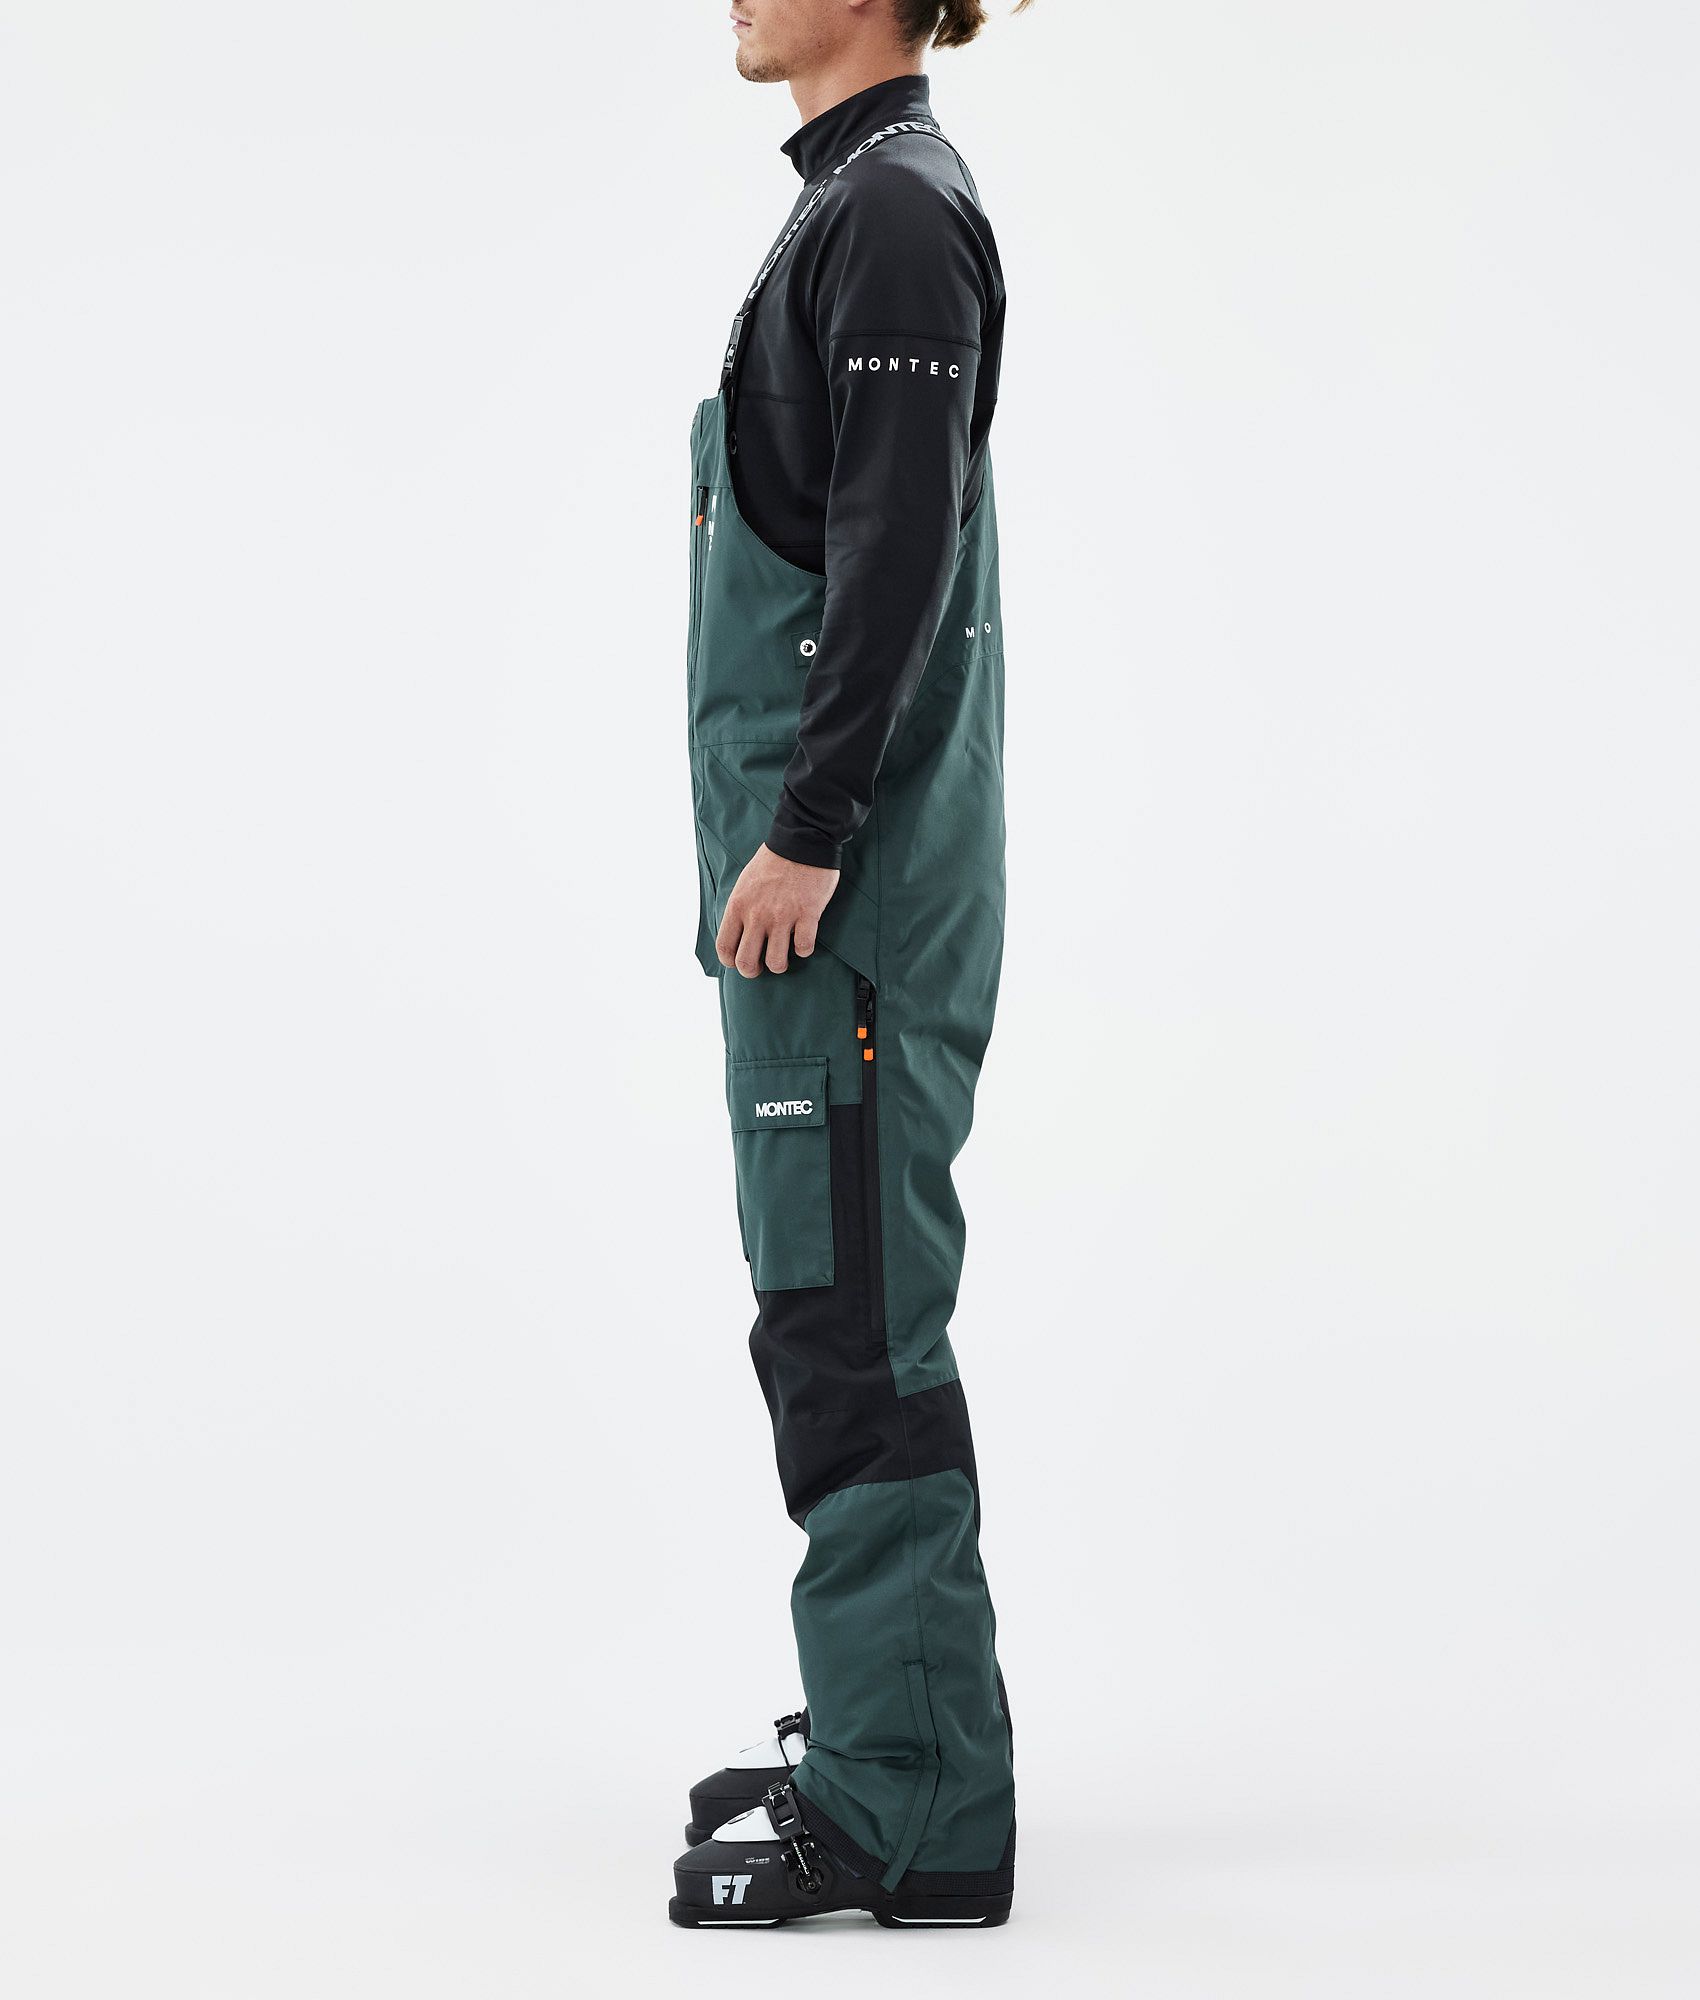 Picture Object Mens Ski Pant in Stone